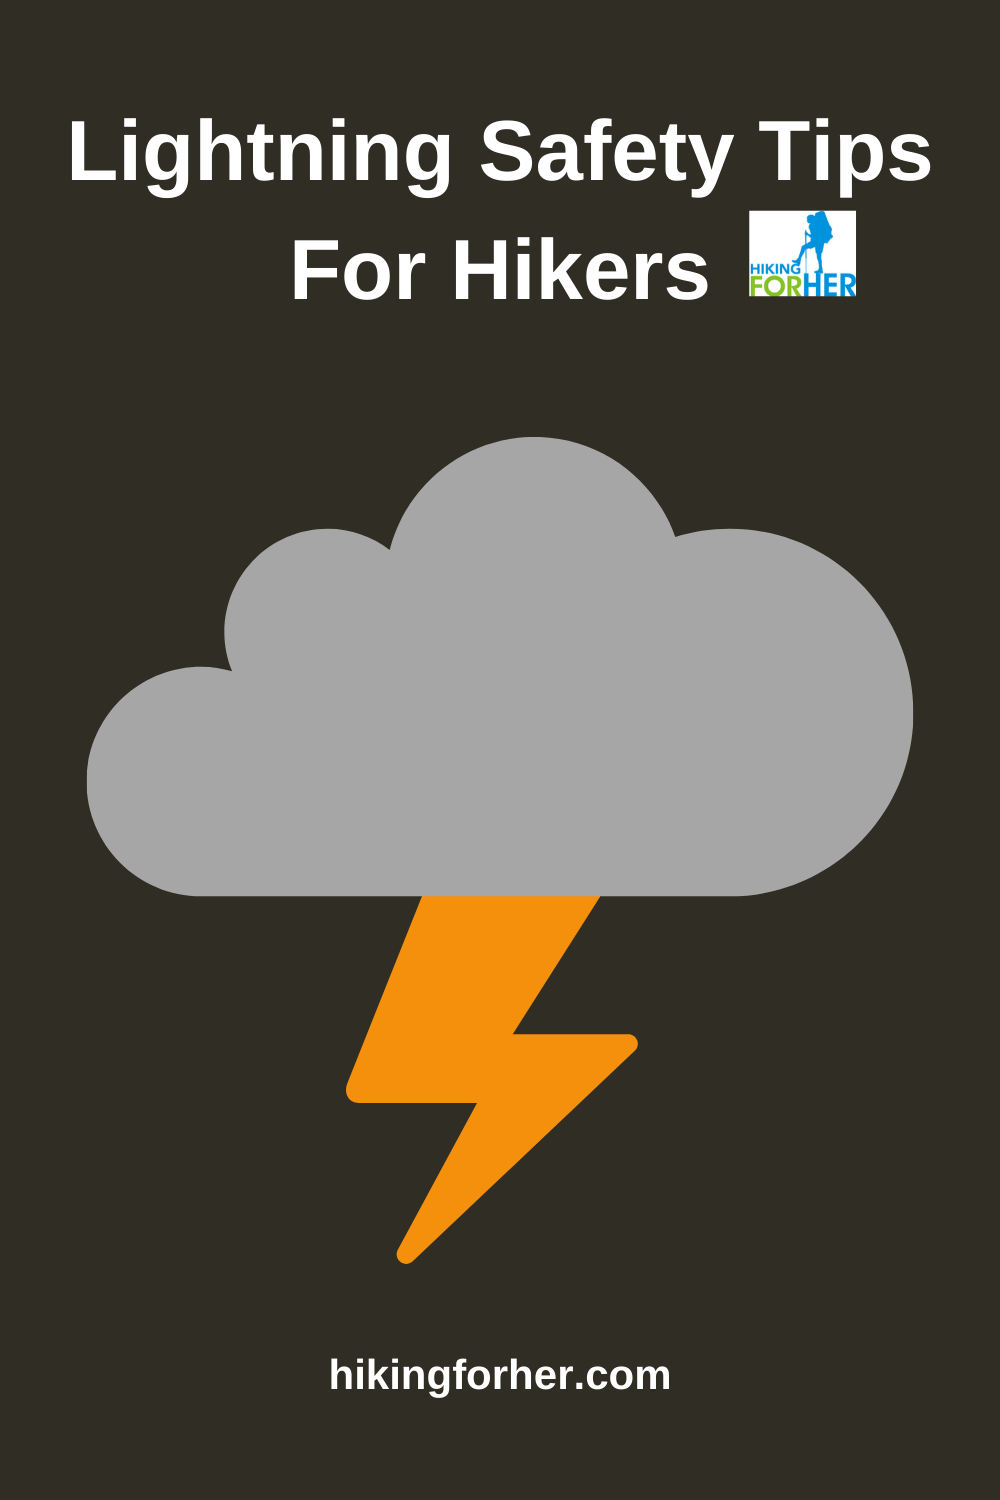 Lightning Safety For Hikers: How To Stay Safe In Thunderstorms